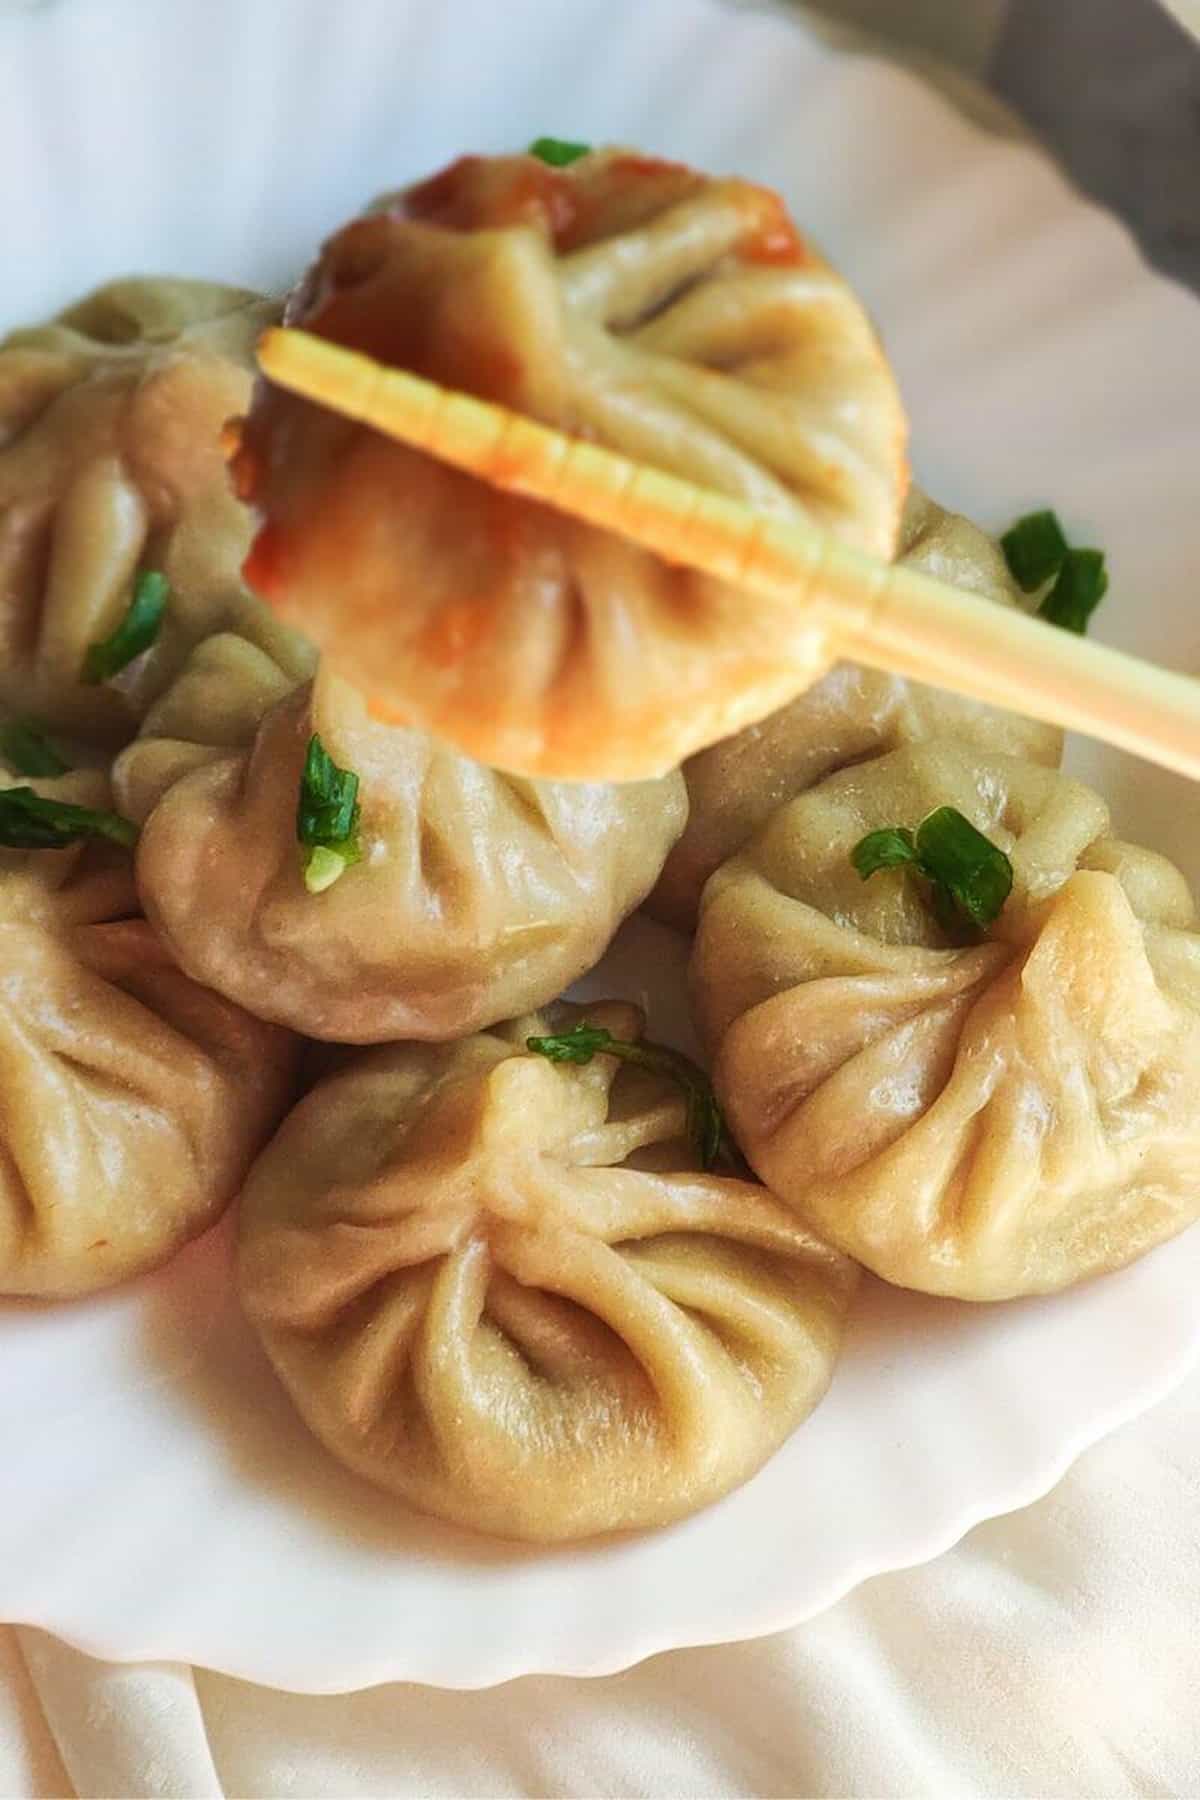 Momos on a plate with chopsticks holding one up.